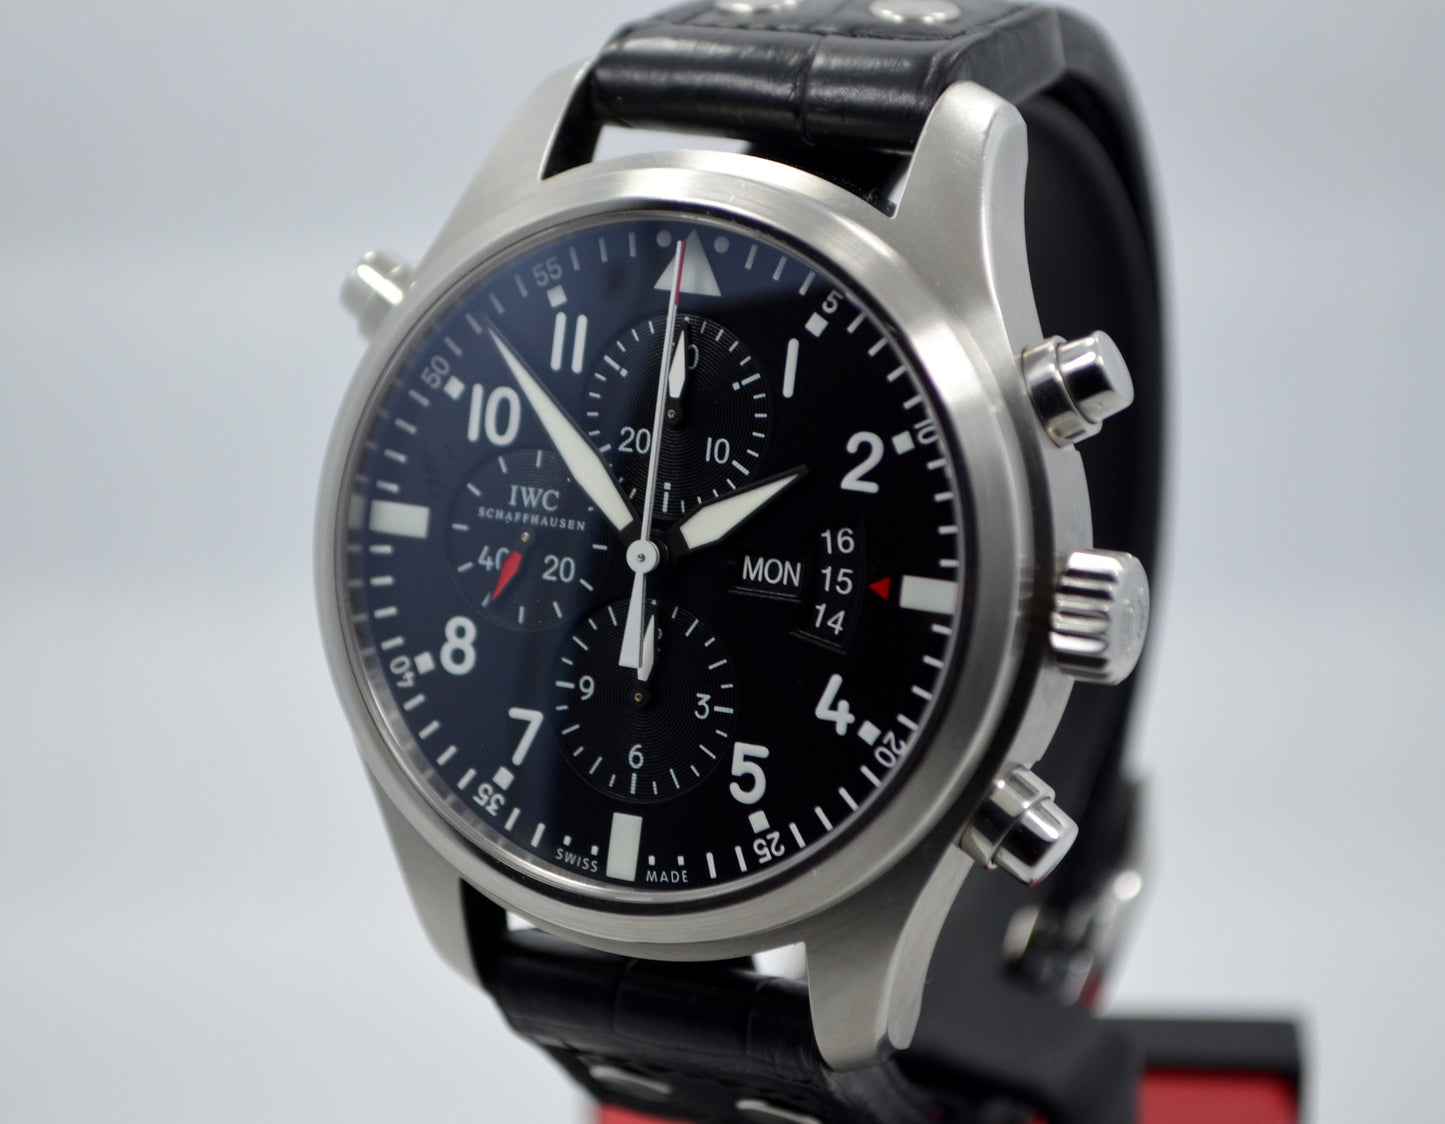 IWC Pilots Double Chronograph IW377801 Stainless Steel Black Dial 46mm Watch - Hashtag Watch Company